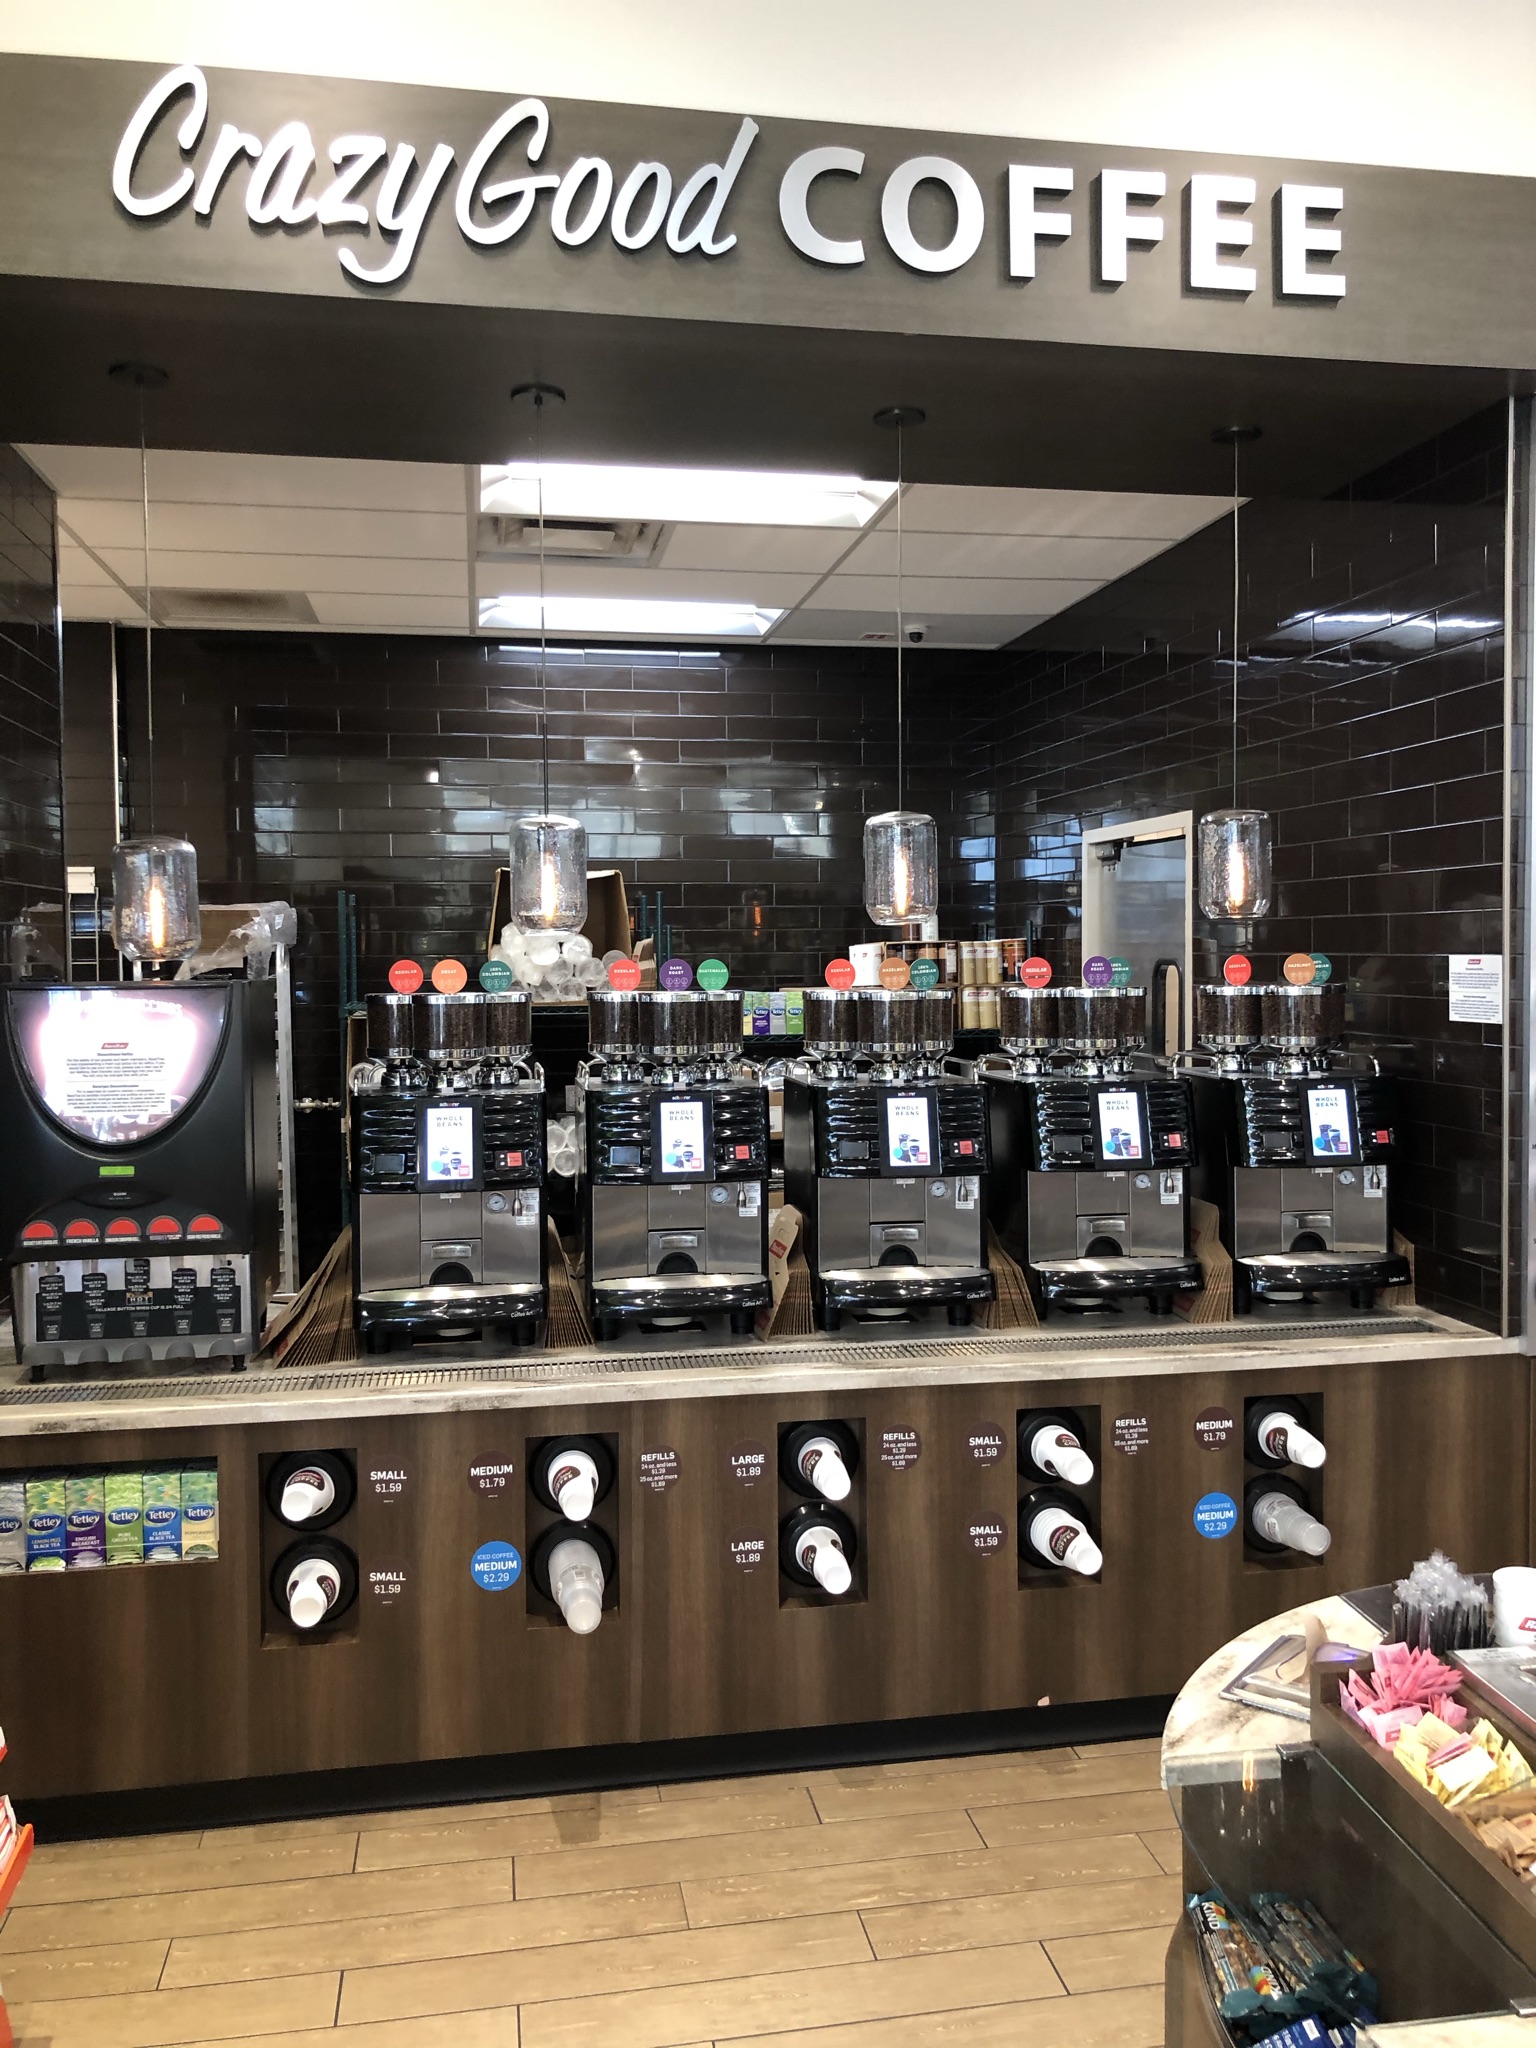 Available property at RaceTrac Store Coffee Area